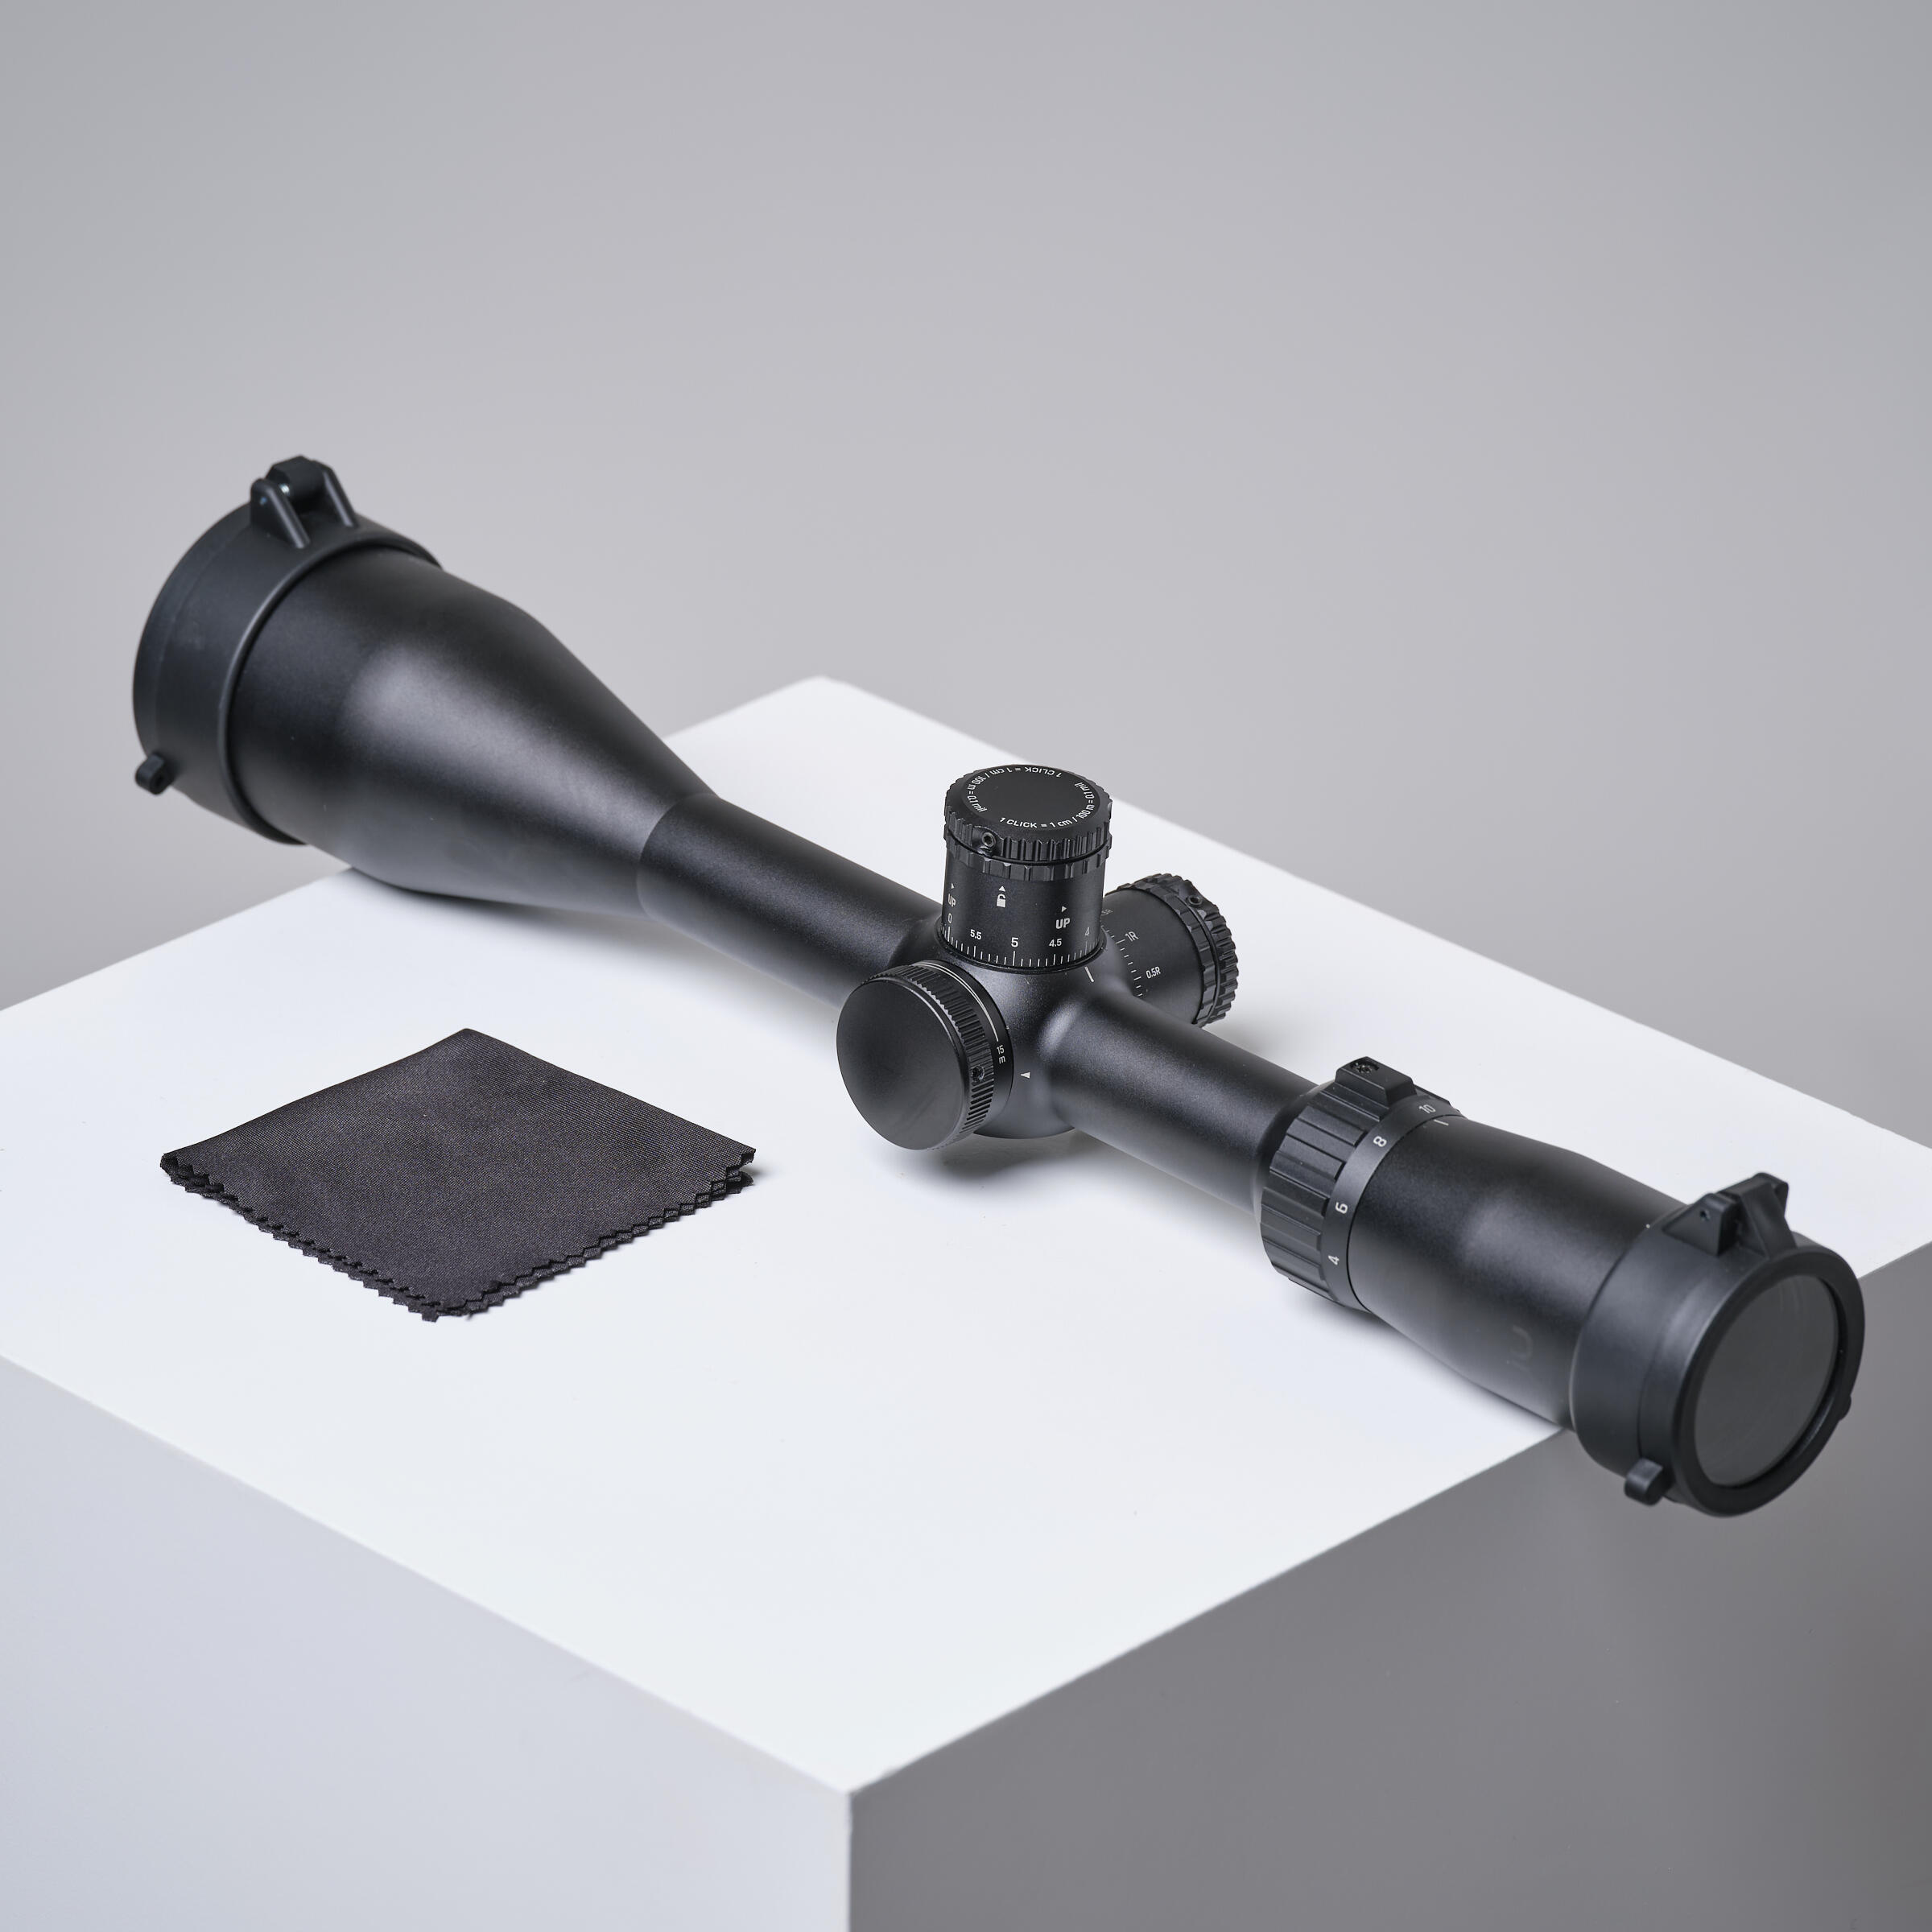 SCOPE 4-16X50 with adjustable parallax 10/11